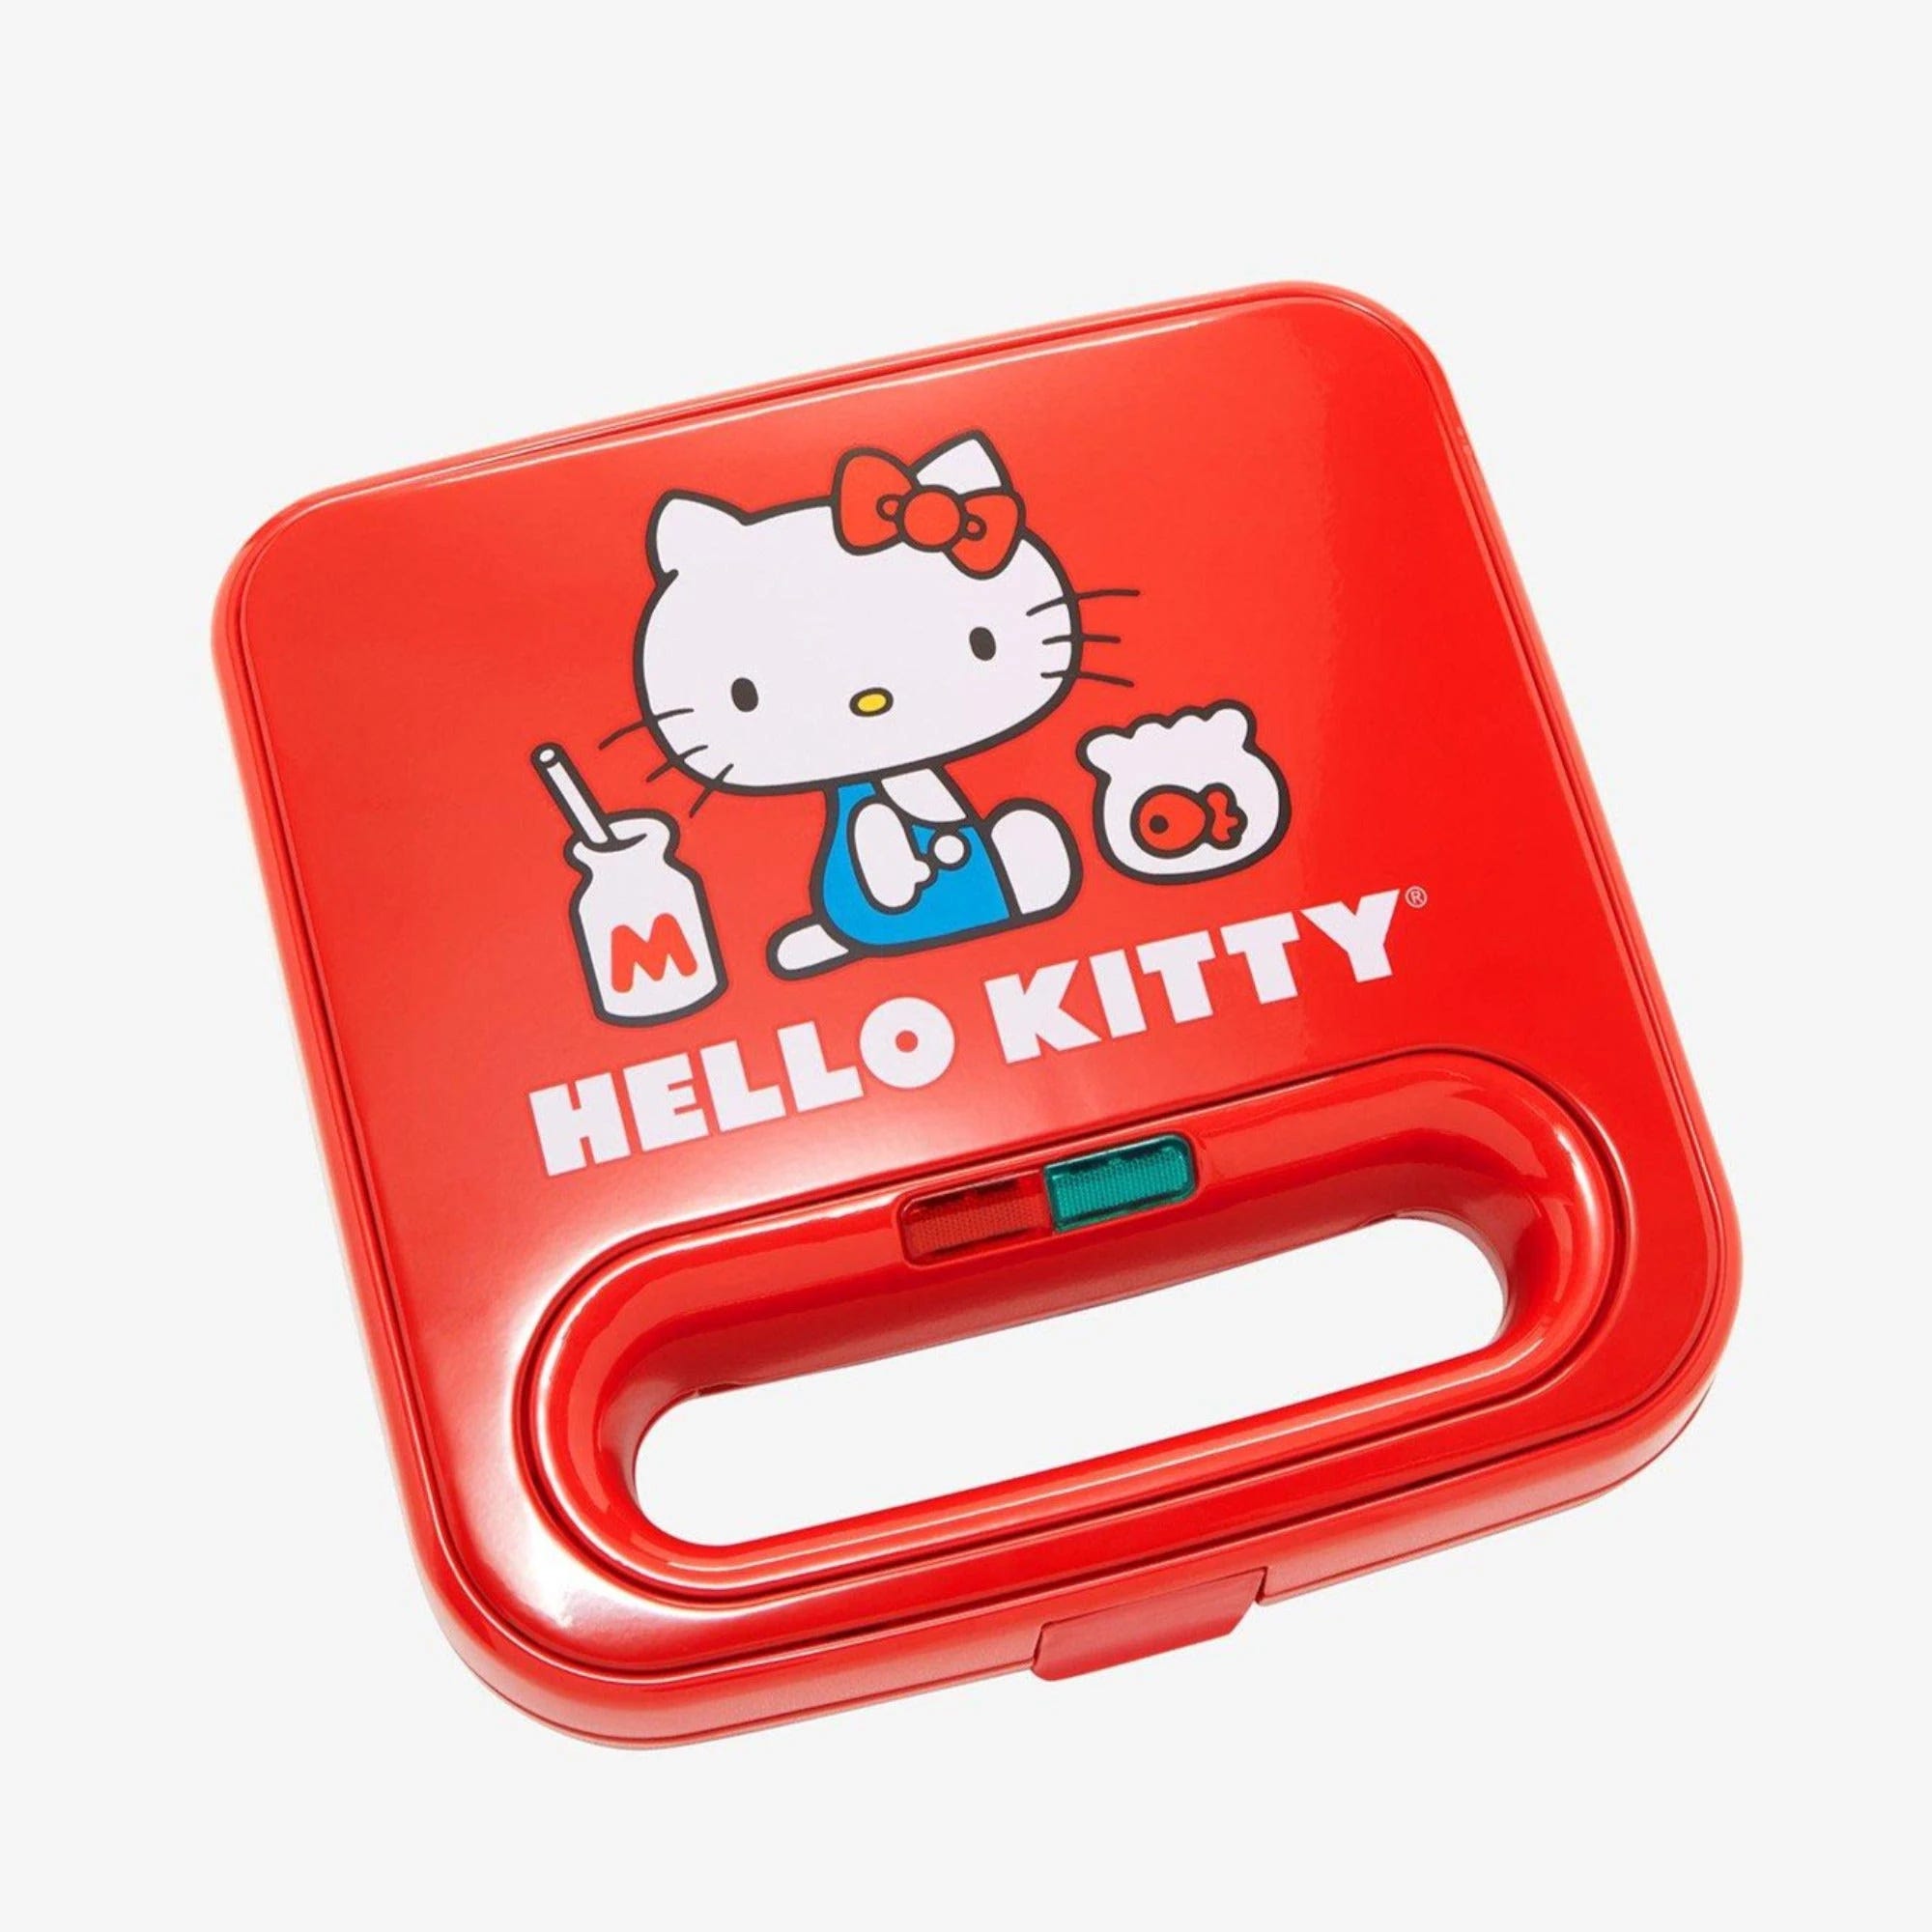 Hello Kitty Grilled Cheese Maker with Hello Kitty Design | Image